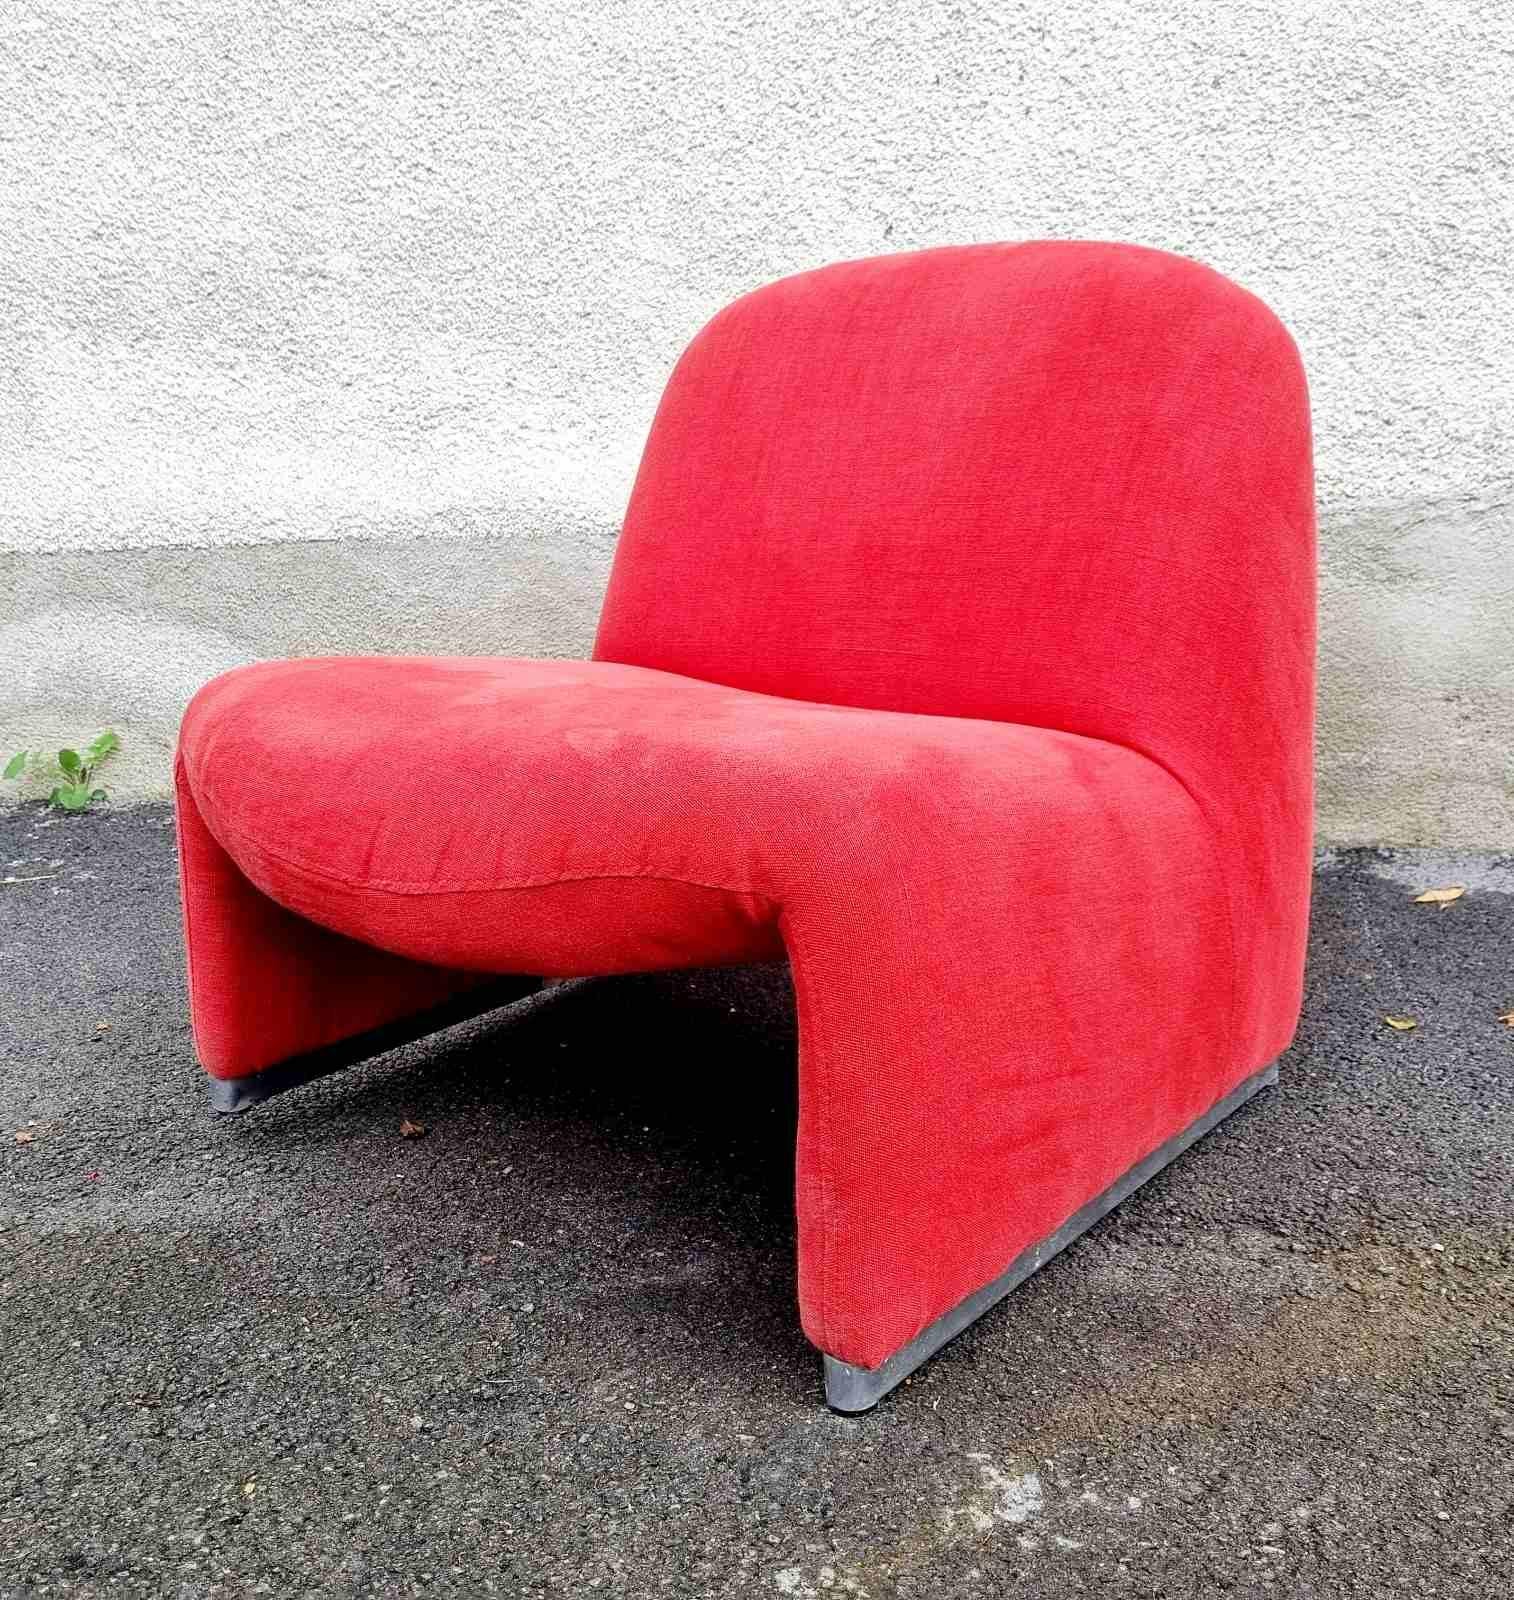 Italian modern red Alky model chairs designed by Giancarlo Piretti for Anonima Castelli, 1970s
This lounge “Alky” chair has an original fabric. Aluminum frame and polished chrome footrests. Beautiful organic curves are reminiscent of Pierre Paulin's